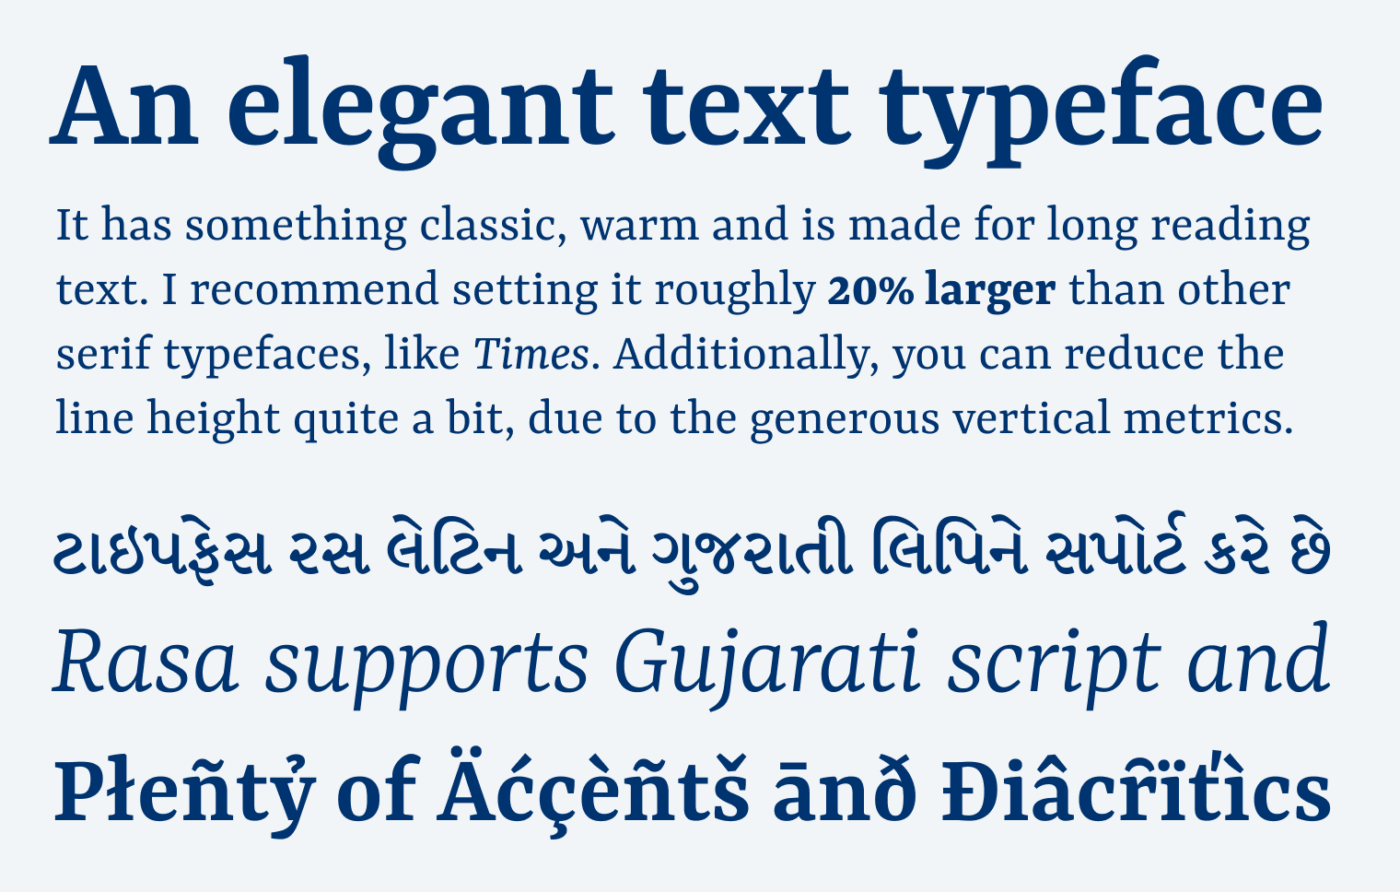 An elegant text typeface It has something classic, warm and is made for long reading text. I recommend setting it roughly 20% larger than other serif typefaces, like Times. Additionally, you can reduce the line height quite a bit, due to the generous vertical metrics. ટાઇપફેસ રસ લેટિન અને ગુજરાતી લિપિને સપોર્ટ કરે છે Rasa supports Gujarati script and plenty of Accents and diacritics